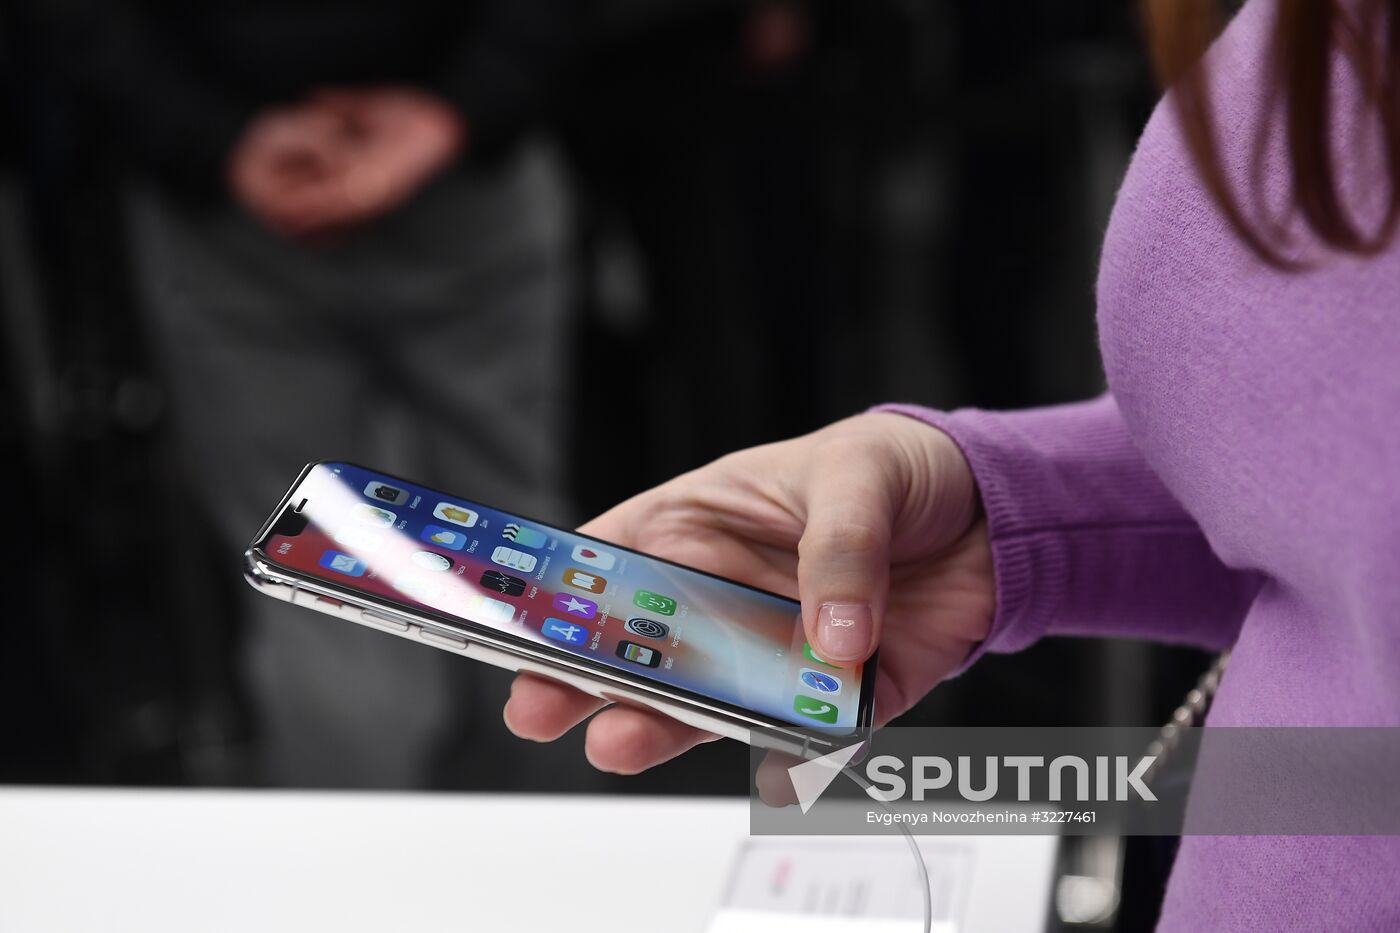 iPhone X goes on sale in Russia